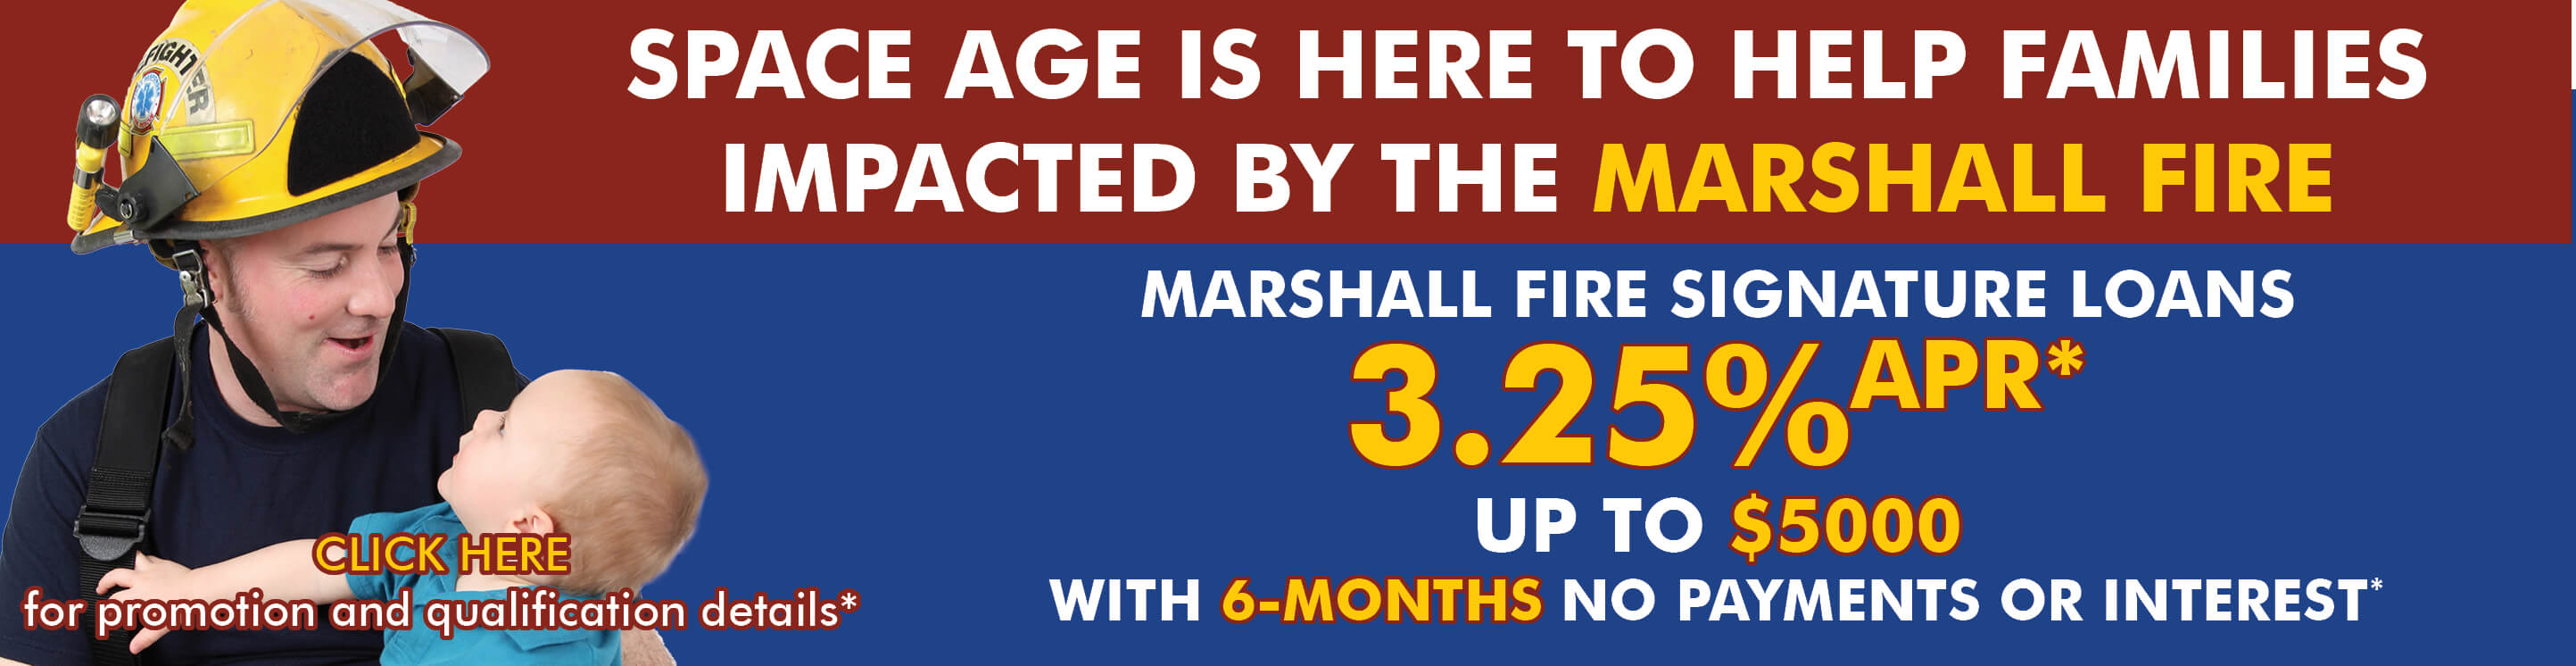 Marshall Fire Relief Loan at 3.25% APR on up to $5000 with 6-Month No Payments or Interest.